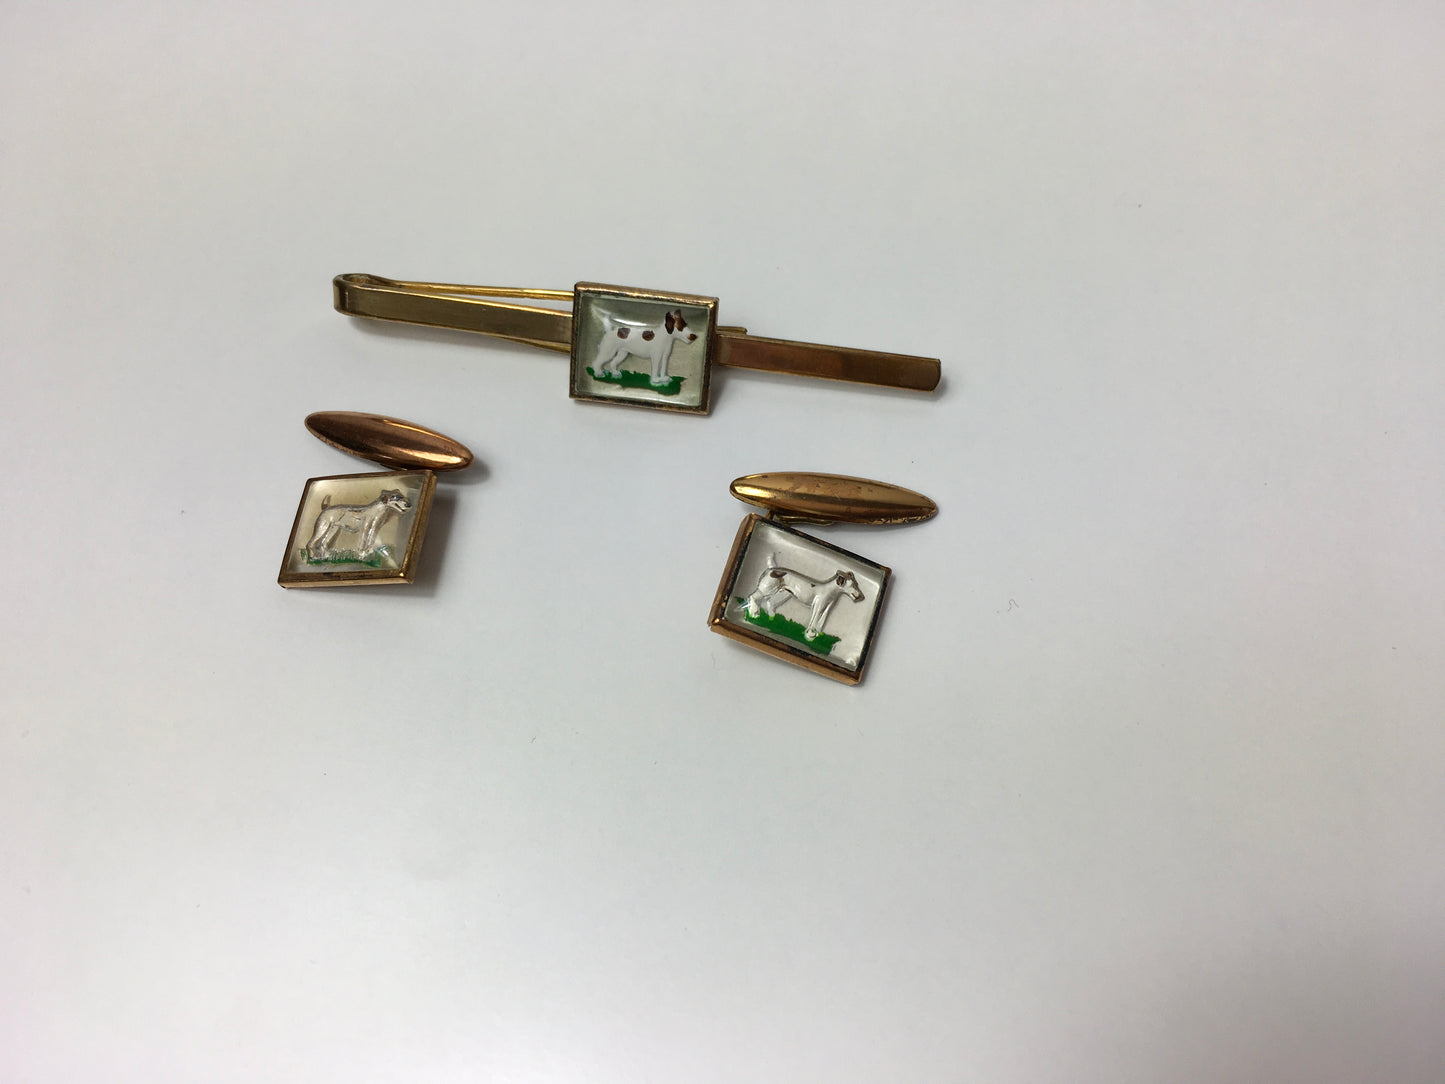 Original Gents Tie Pin and Cufflinks Set - With a Lovely Terrier Dog Motif in a Patch of Grass